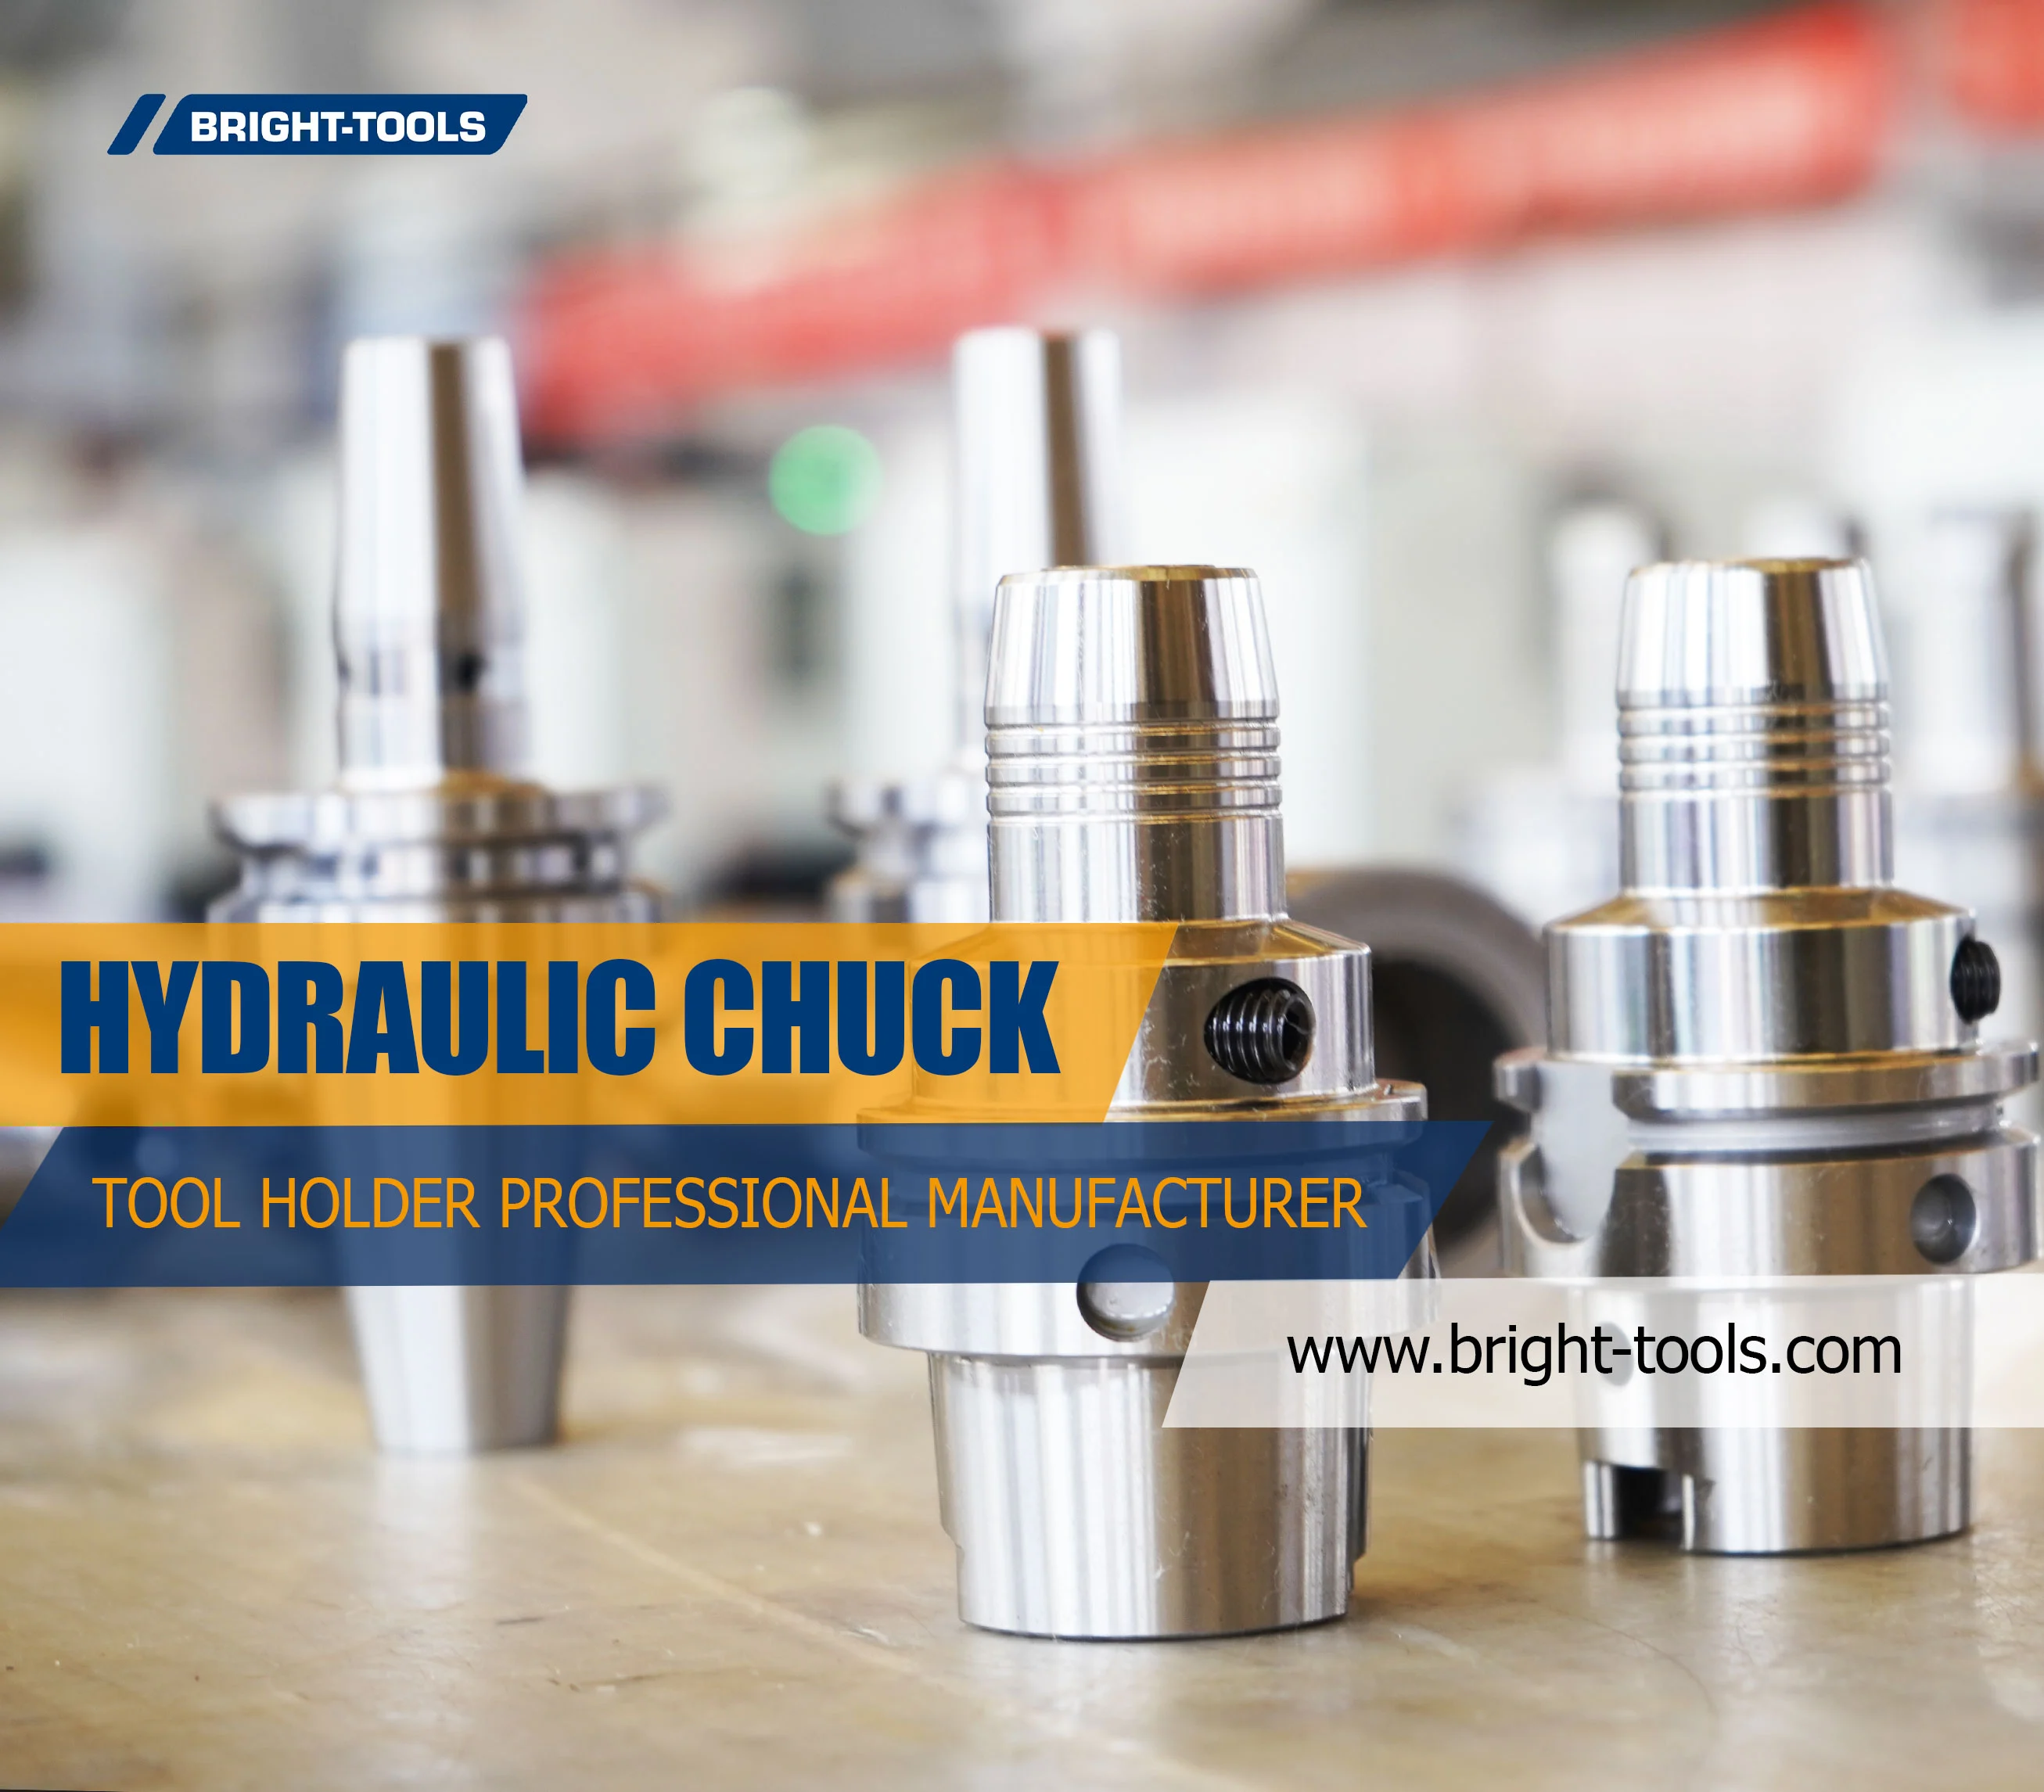 HOW DOES A HYDRAULIC COLLET CHUCK WORK?